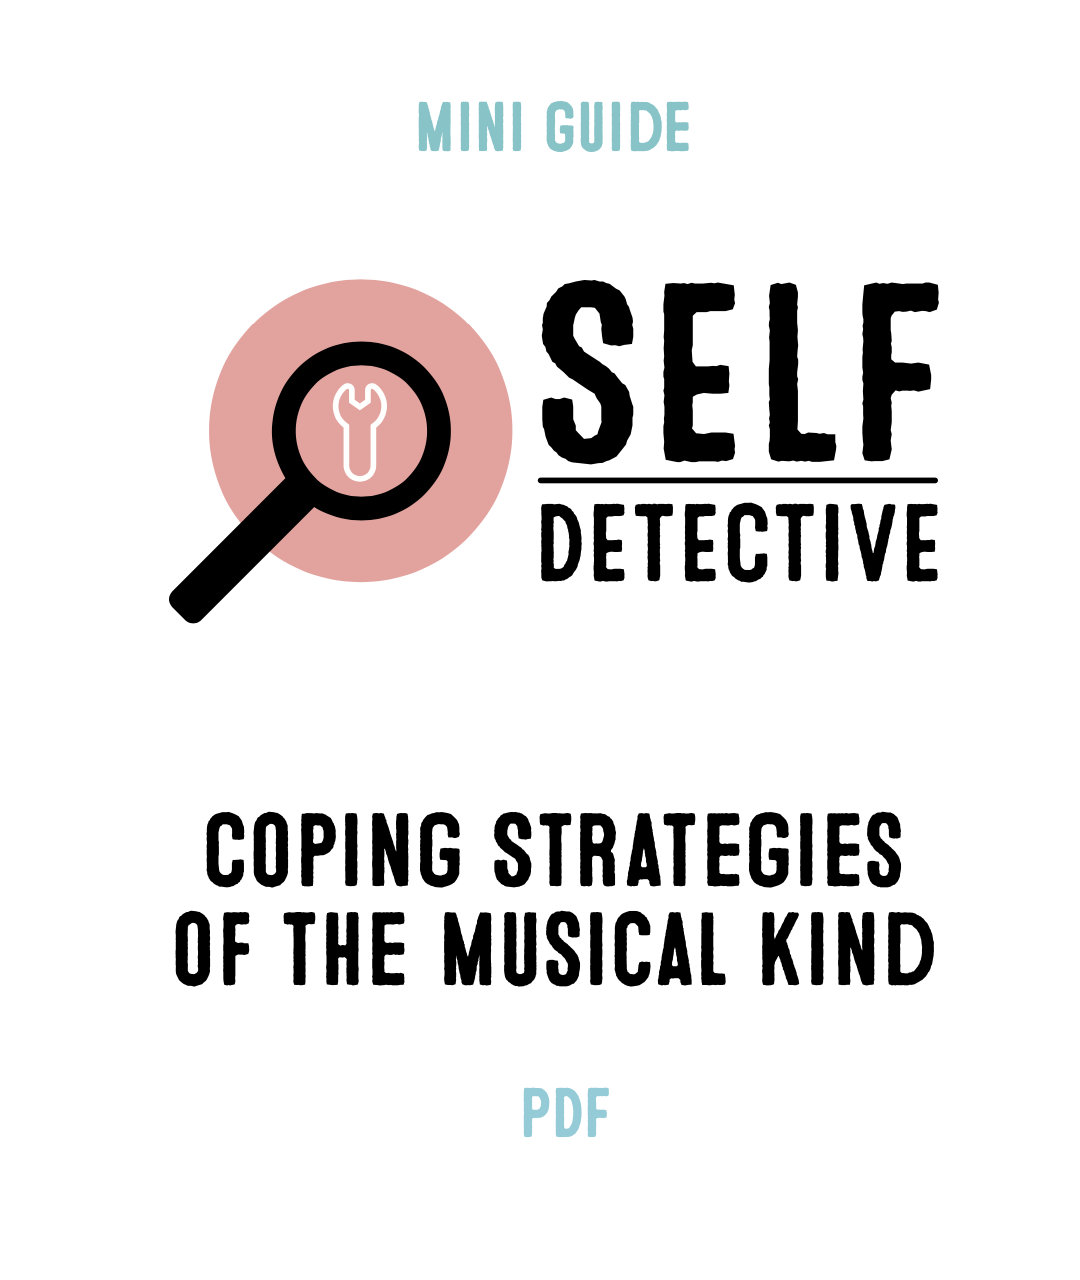 Coping Strategies of the Musical Kind (PDF version)